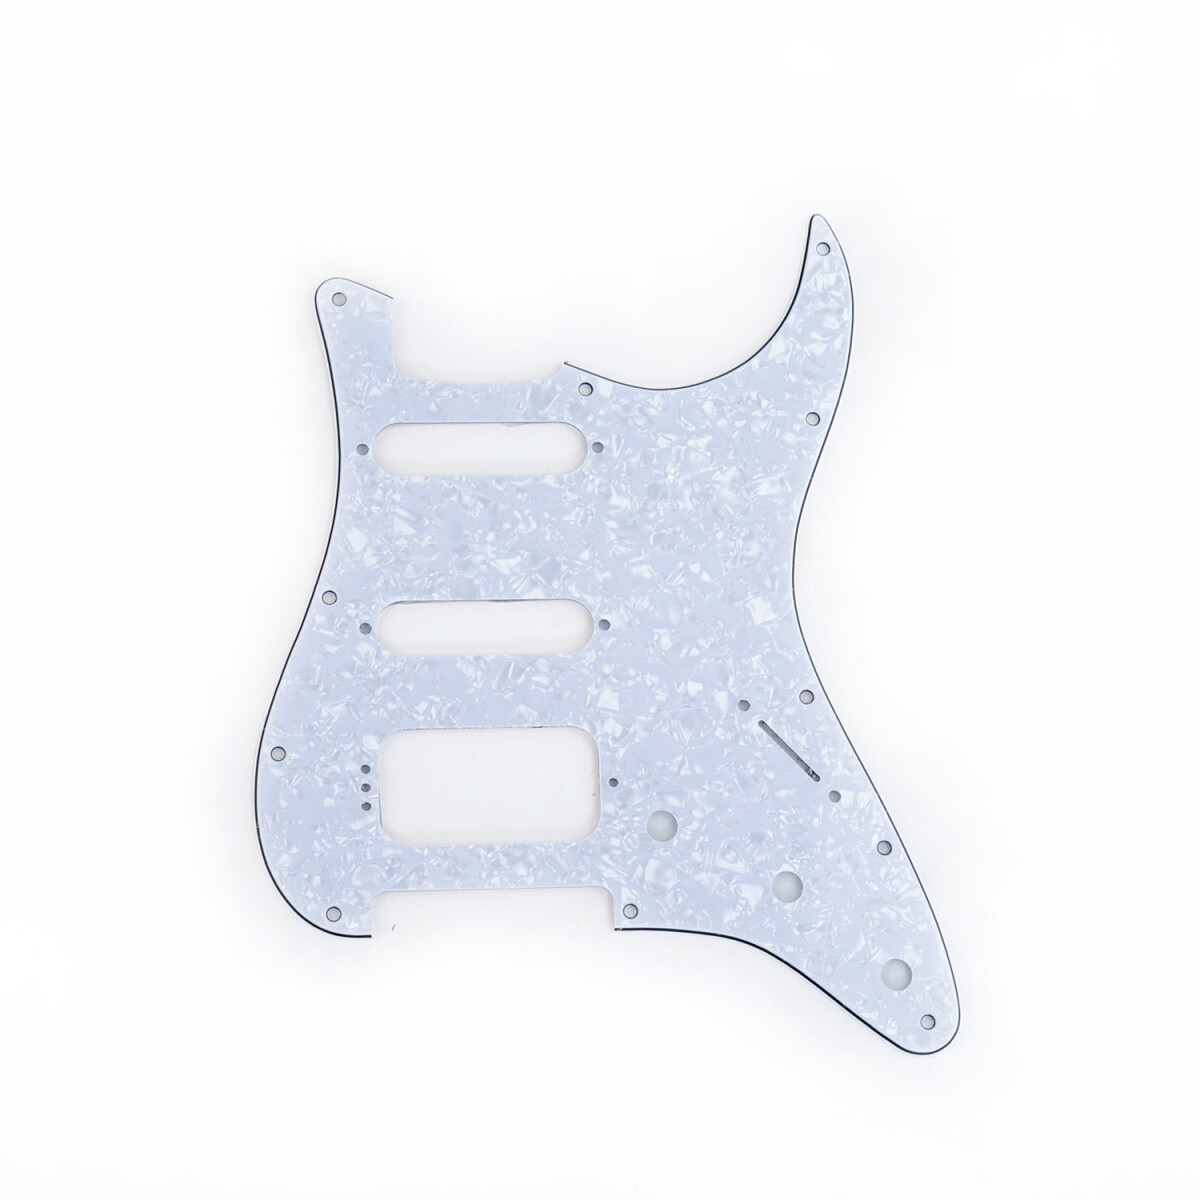 Brio 11-Hole Modern Style Strat HSS Pickguard for American Stratocaster Pearloid White [Round Corners]